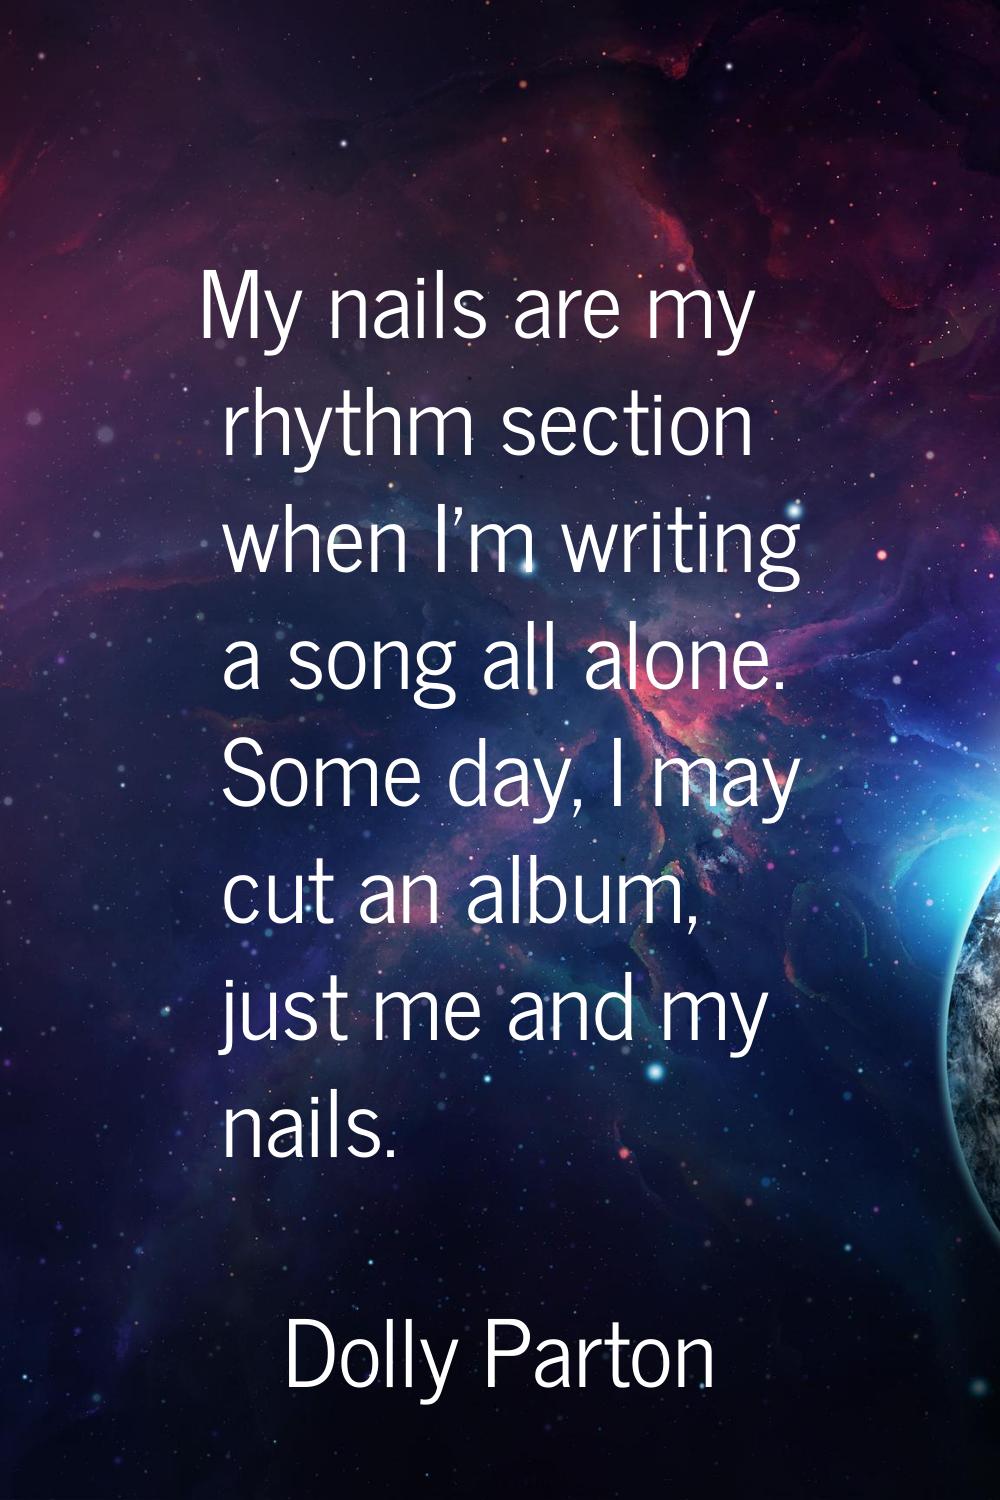 My nails are my rhythm section when I'm writing a song all alone. Some day, I may cut an album, jus